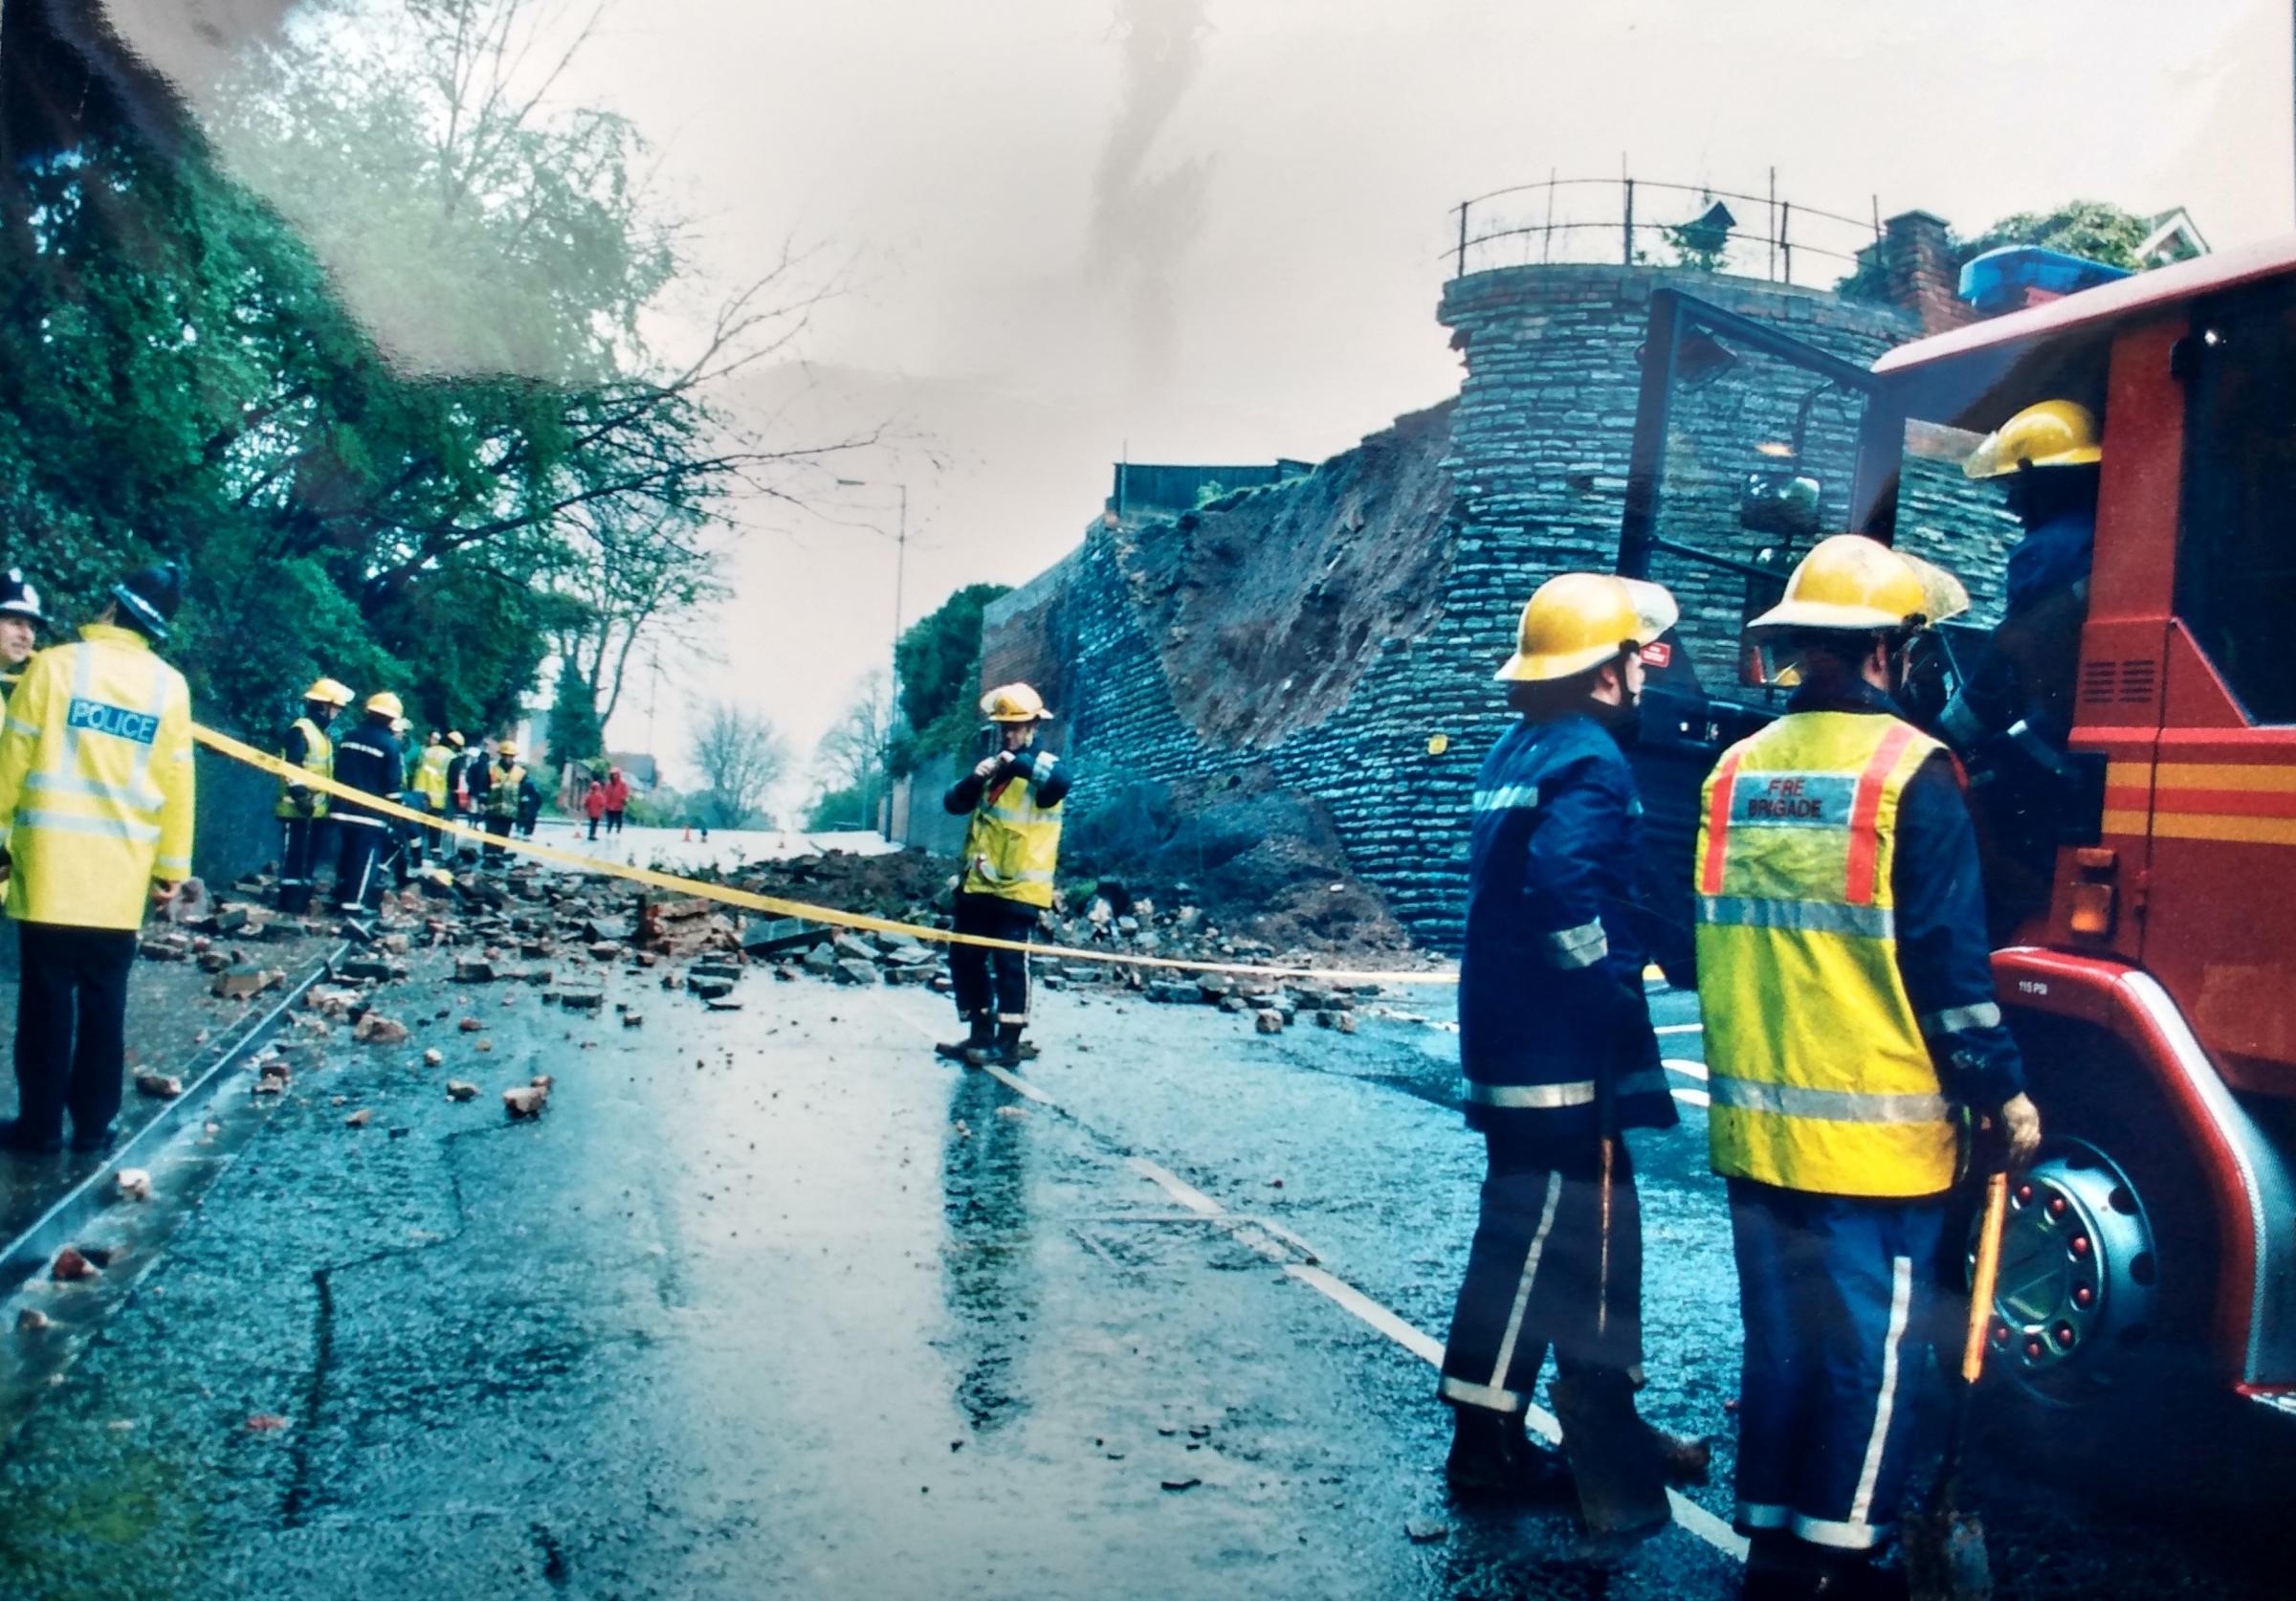 The scene after the collapse of the garden wall in April 1998